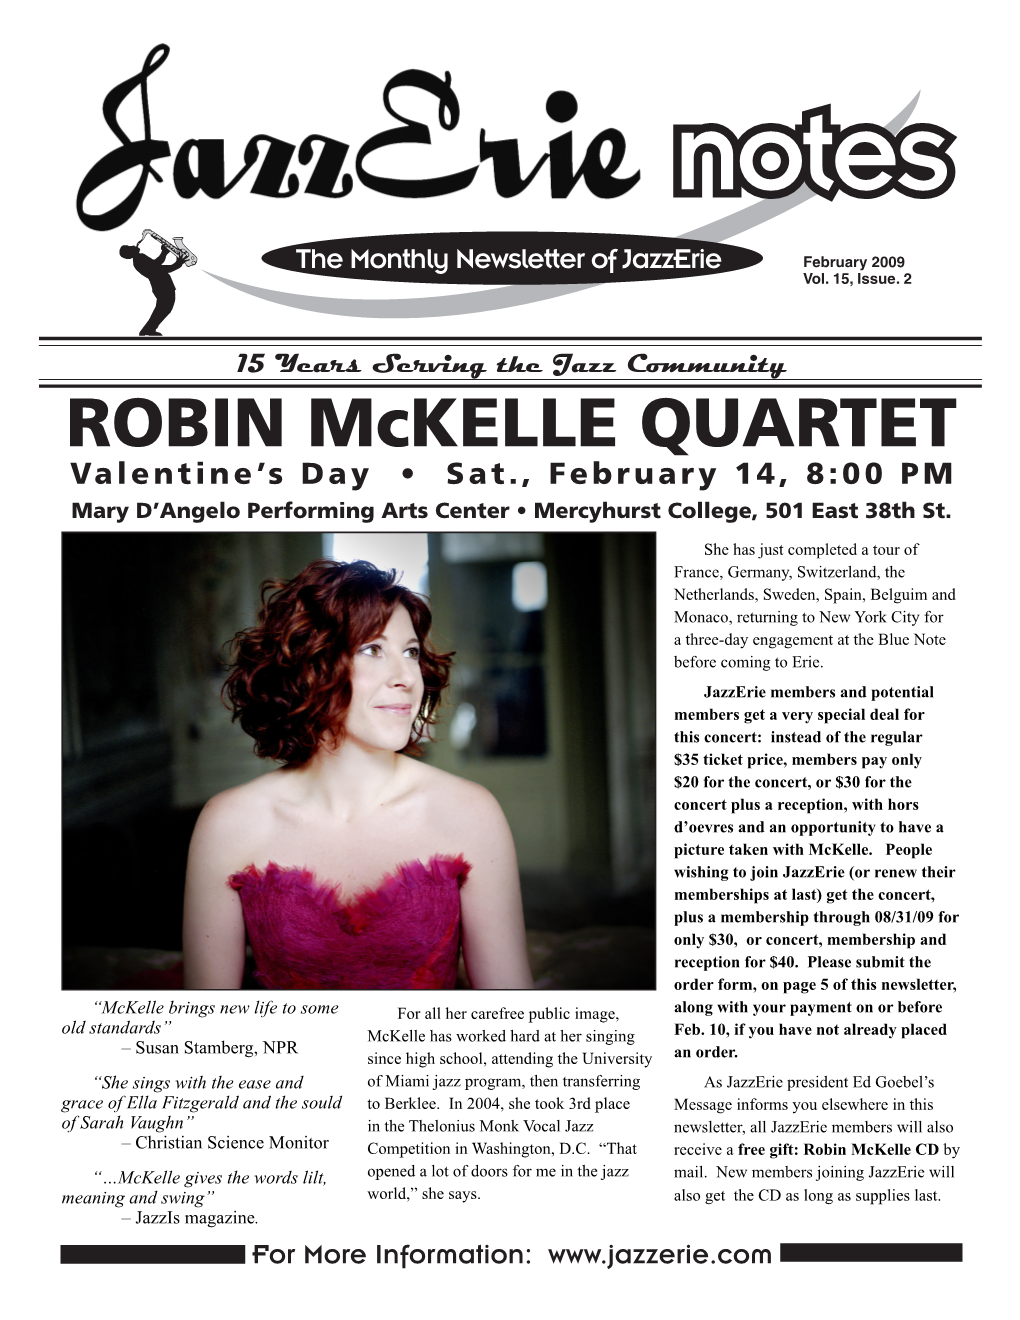 ROBIN Mckelle QUARTET Valentine’S Day • Sat., February 14, 8:00 PM Mary D’Angelo Performing Arts Center • Mercyhurst College, 501 East 38Th St